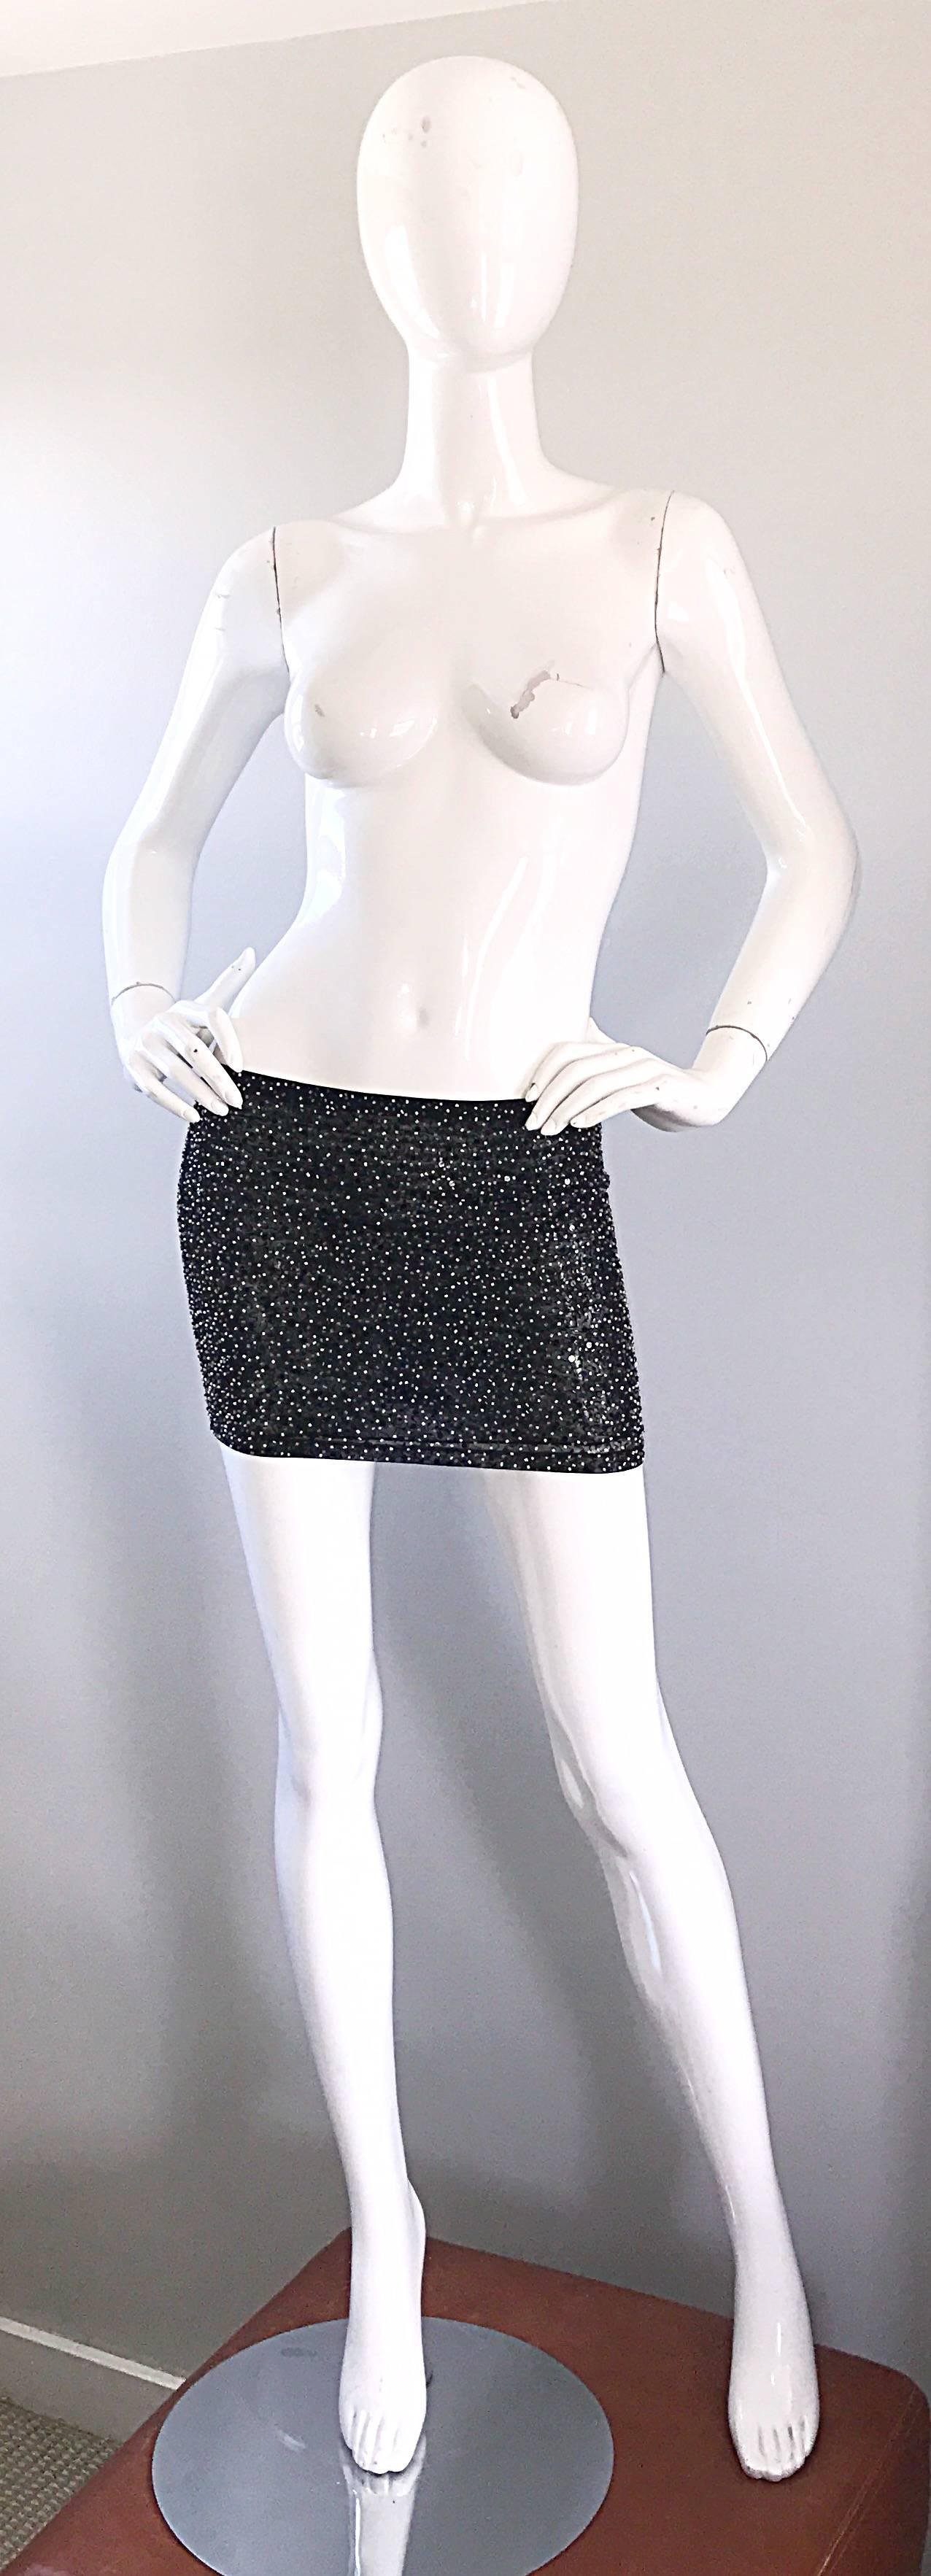 Sexy vintage KIRIZIA 90s beaded mini skirt! Thousands of hand-sewn brown, black and silver seed beads on a black soft nylon and rayon mesh blend fabric. Meant to be a mini skirt, but can easily be worn as a tube top, given the stretch (see photo).